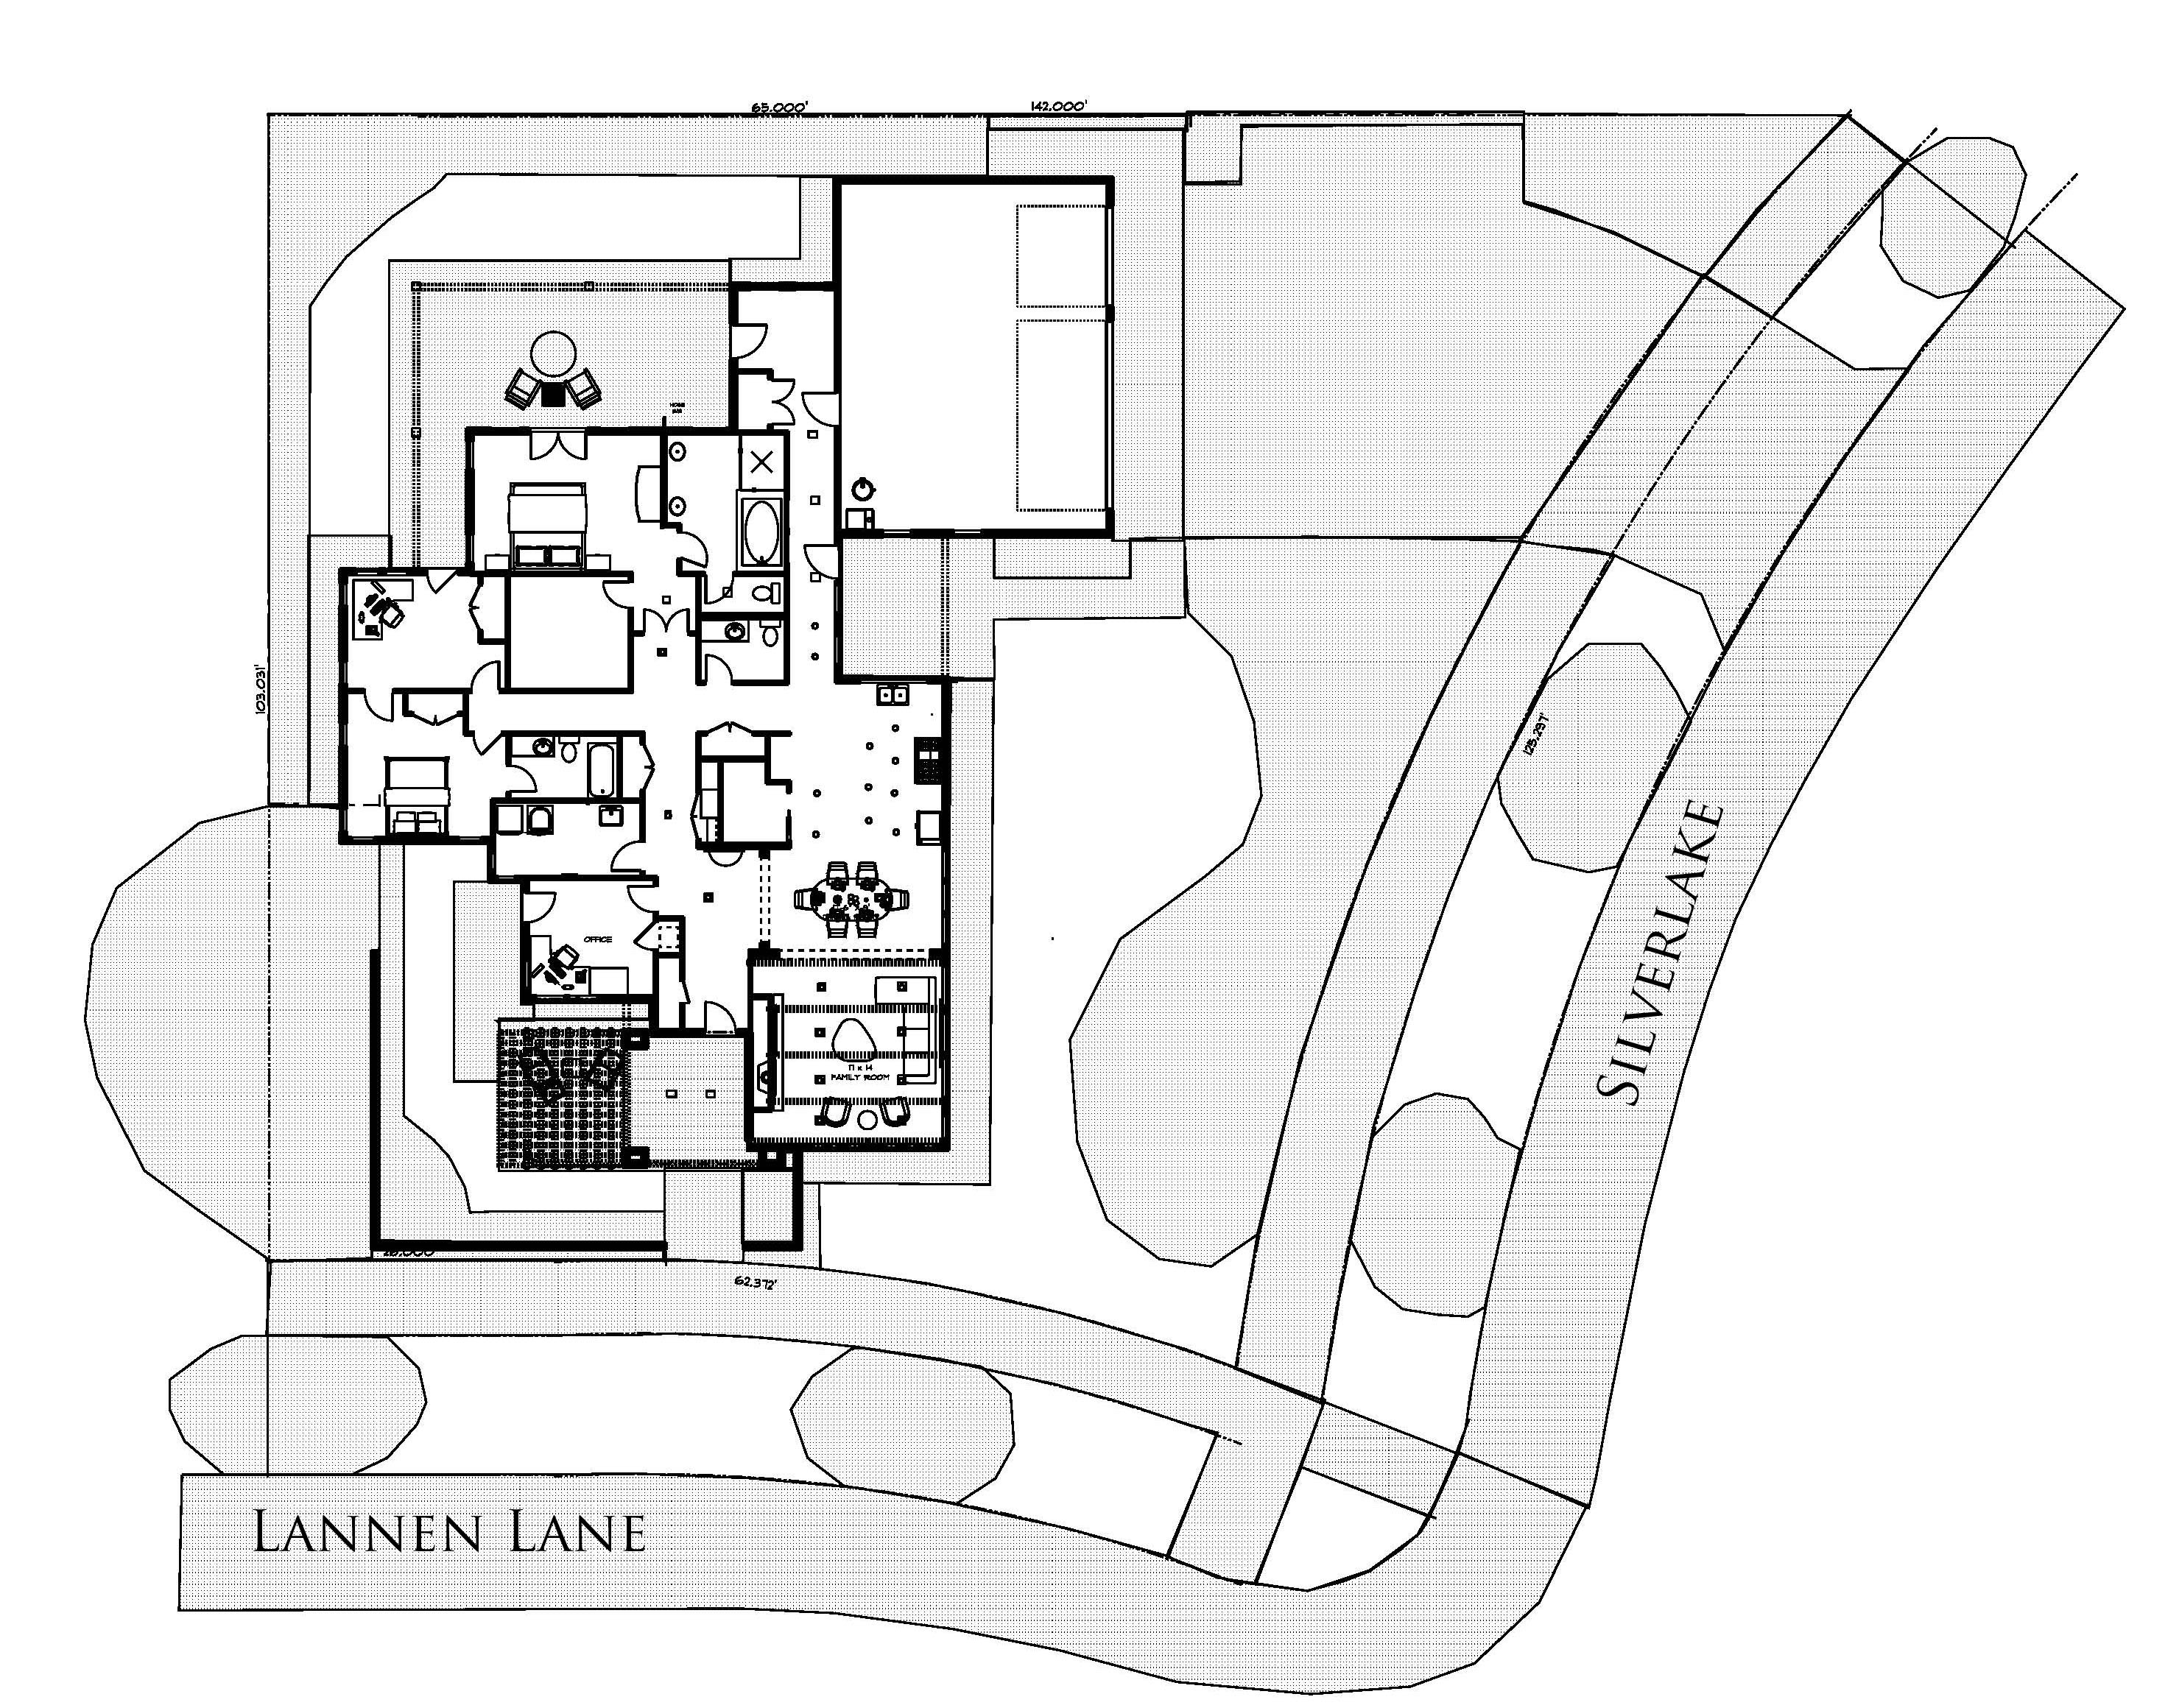 Lot 16 site and plan 4.26.2020